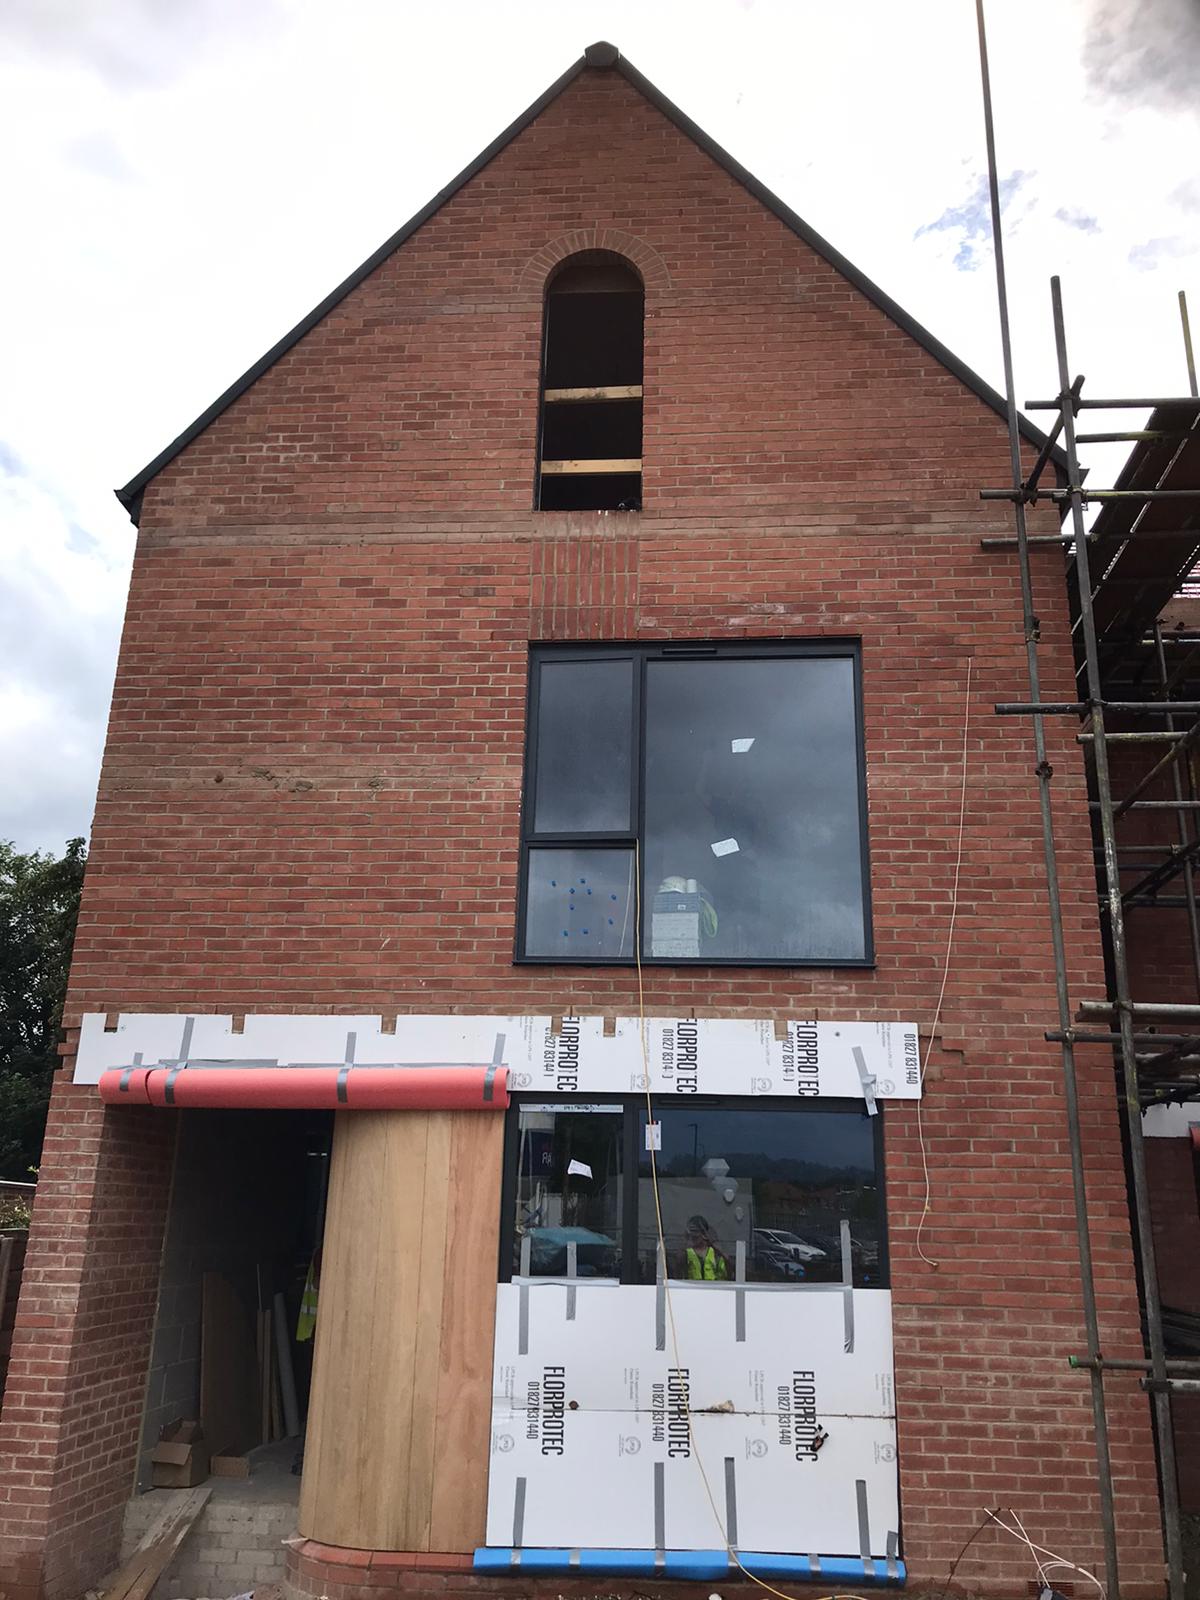 WhatsApp Image 2021 07 29 at 10.46.10 - Scaffolding Comes Down On Our Showhome